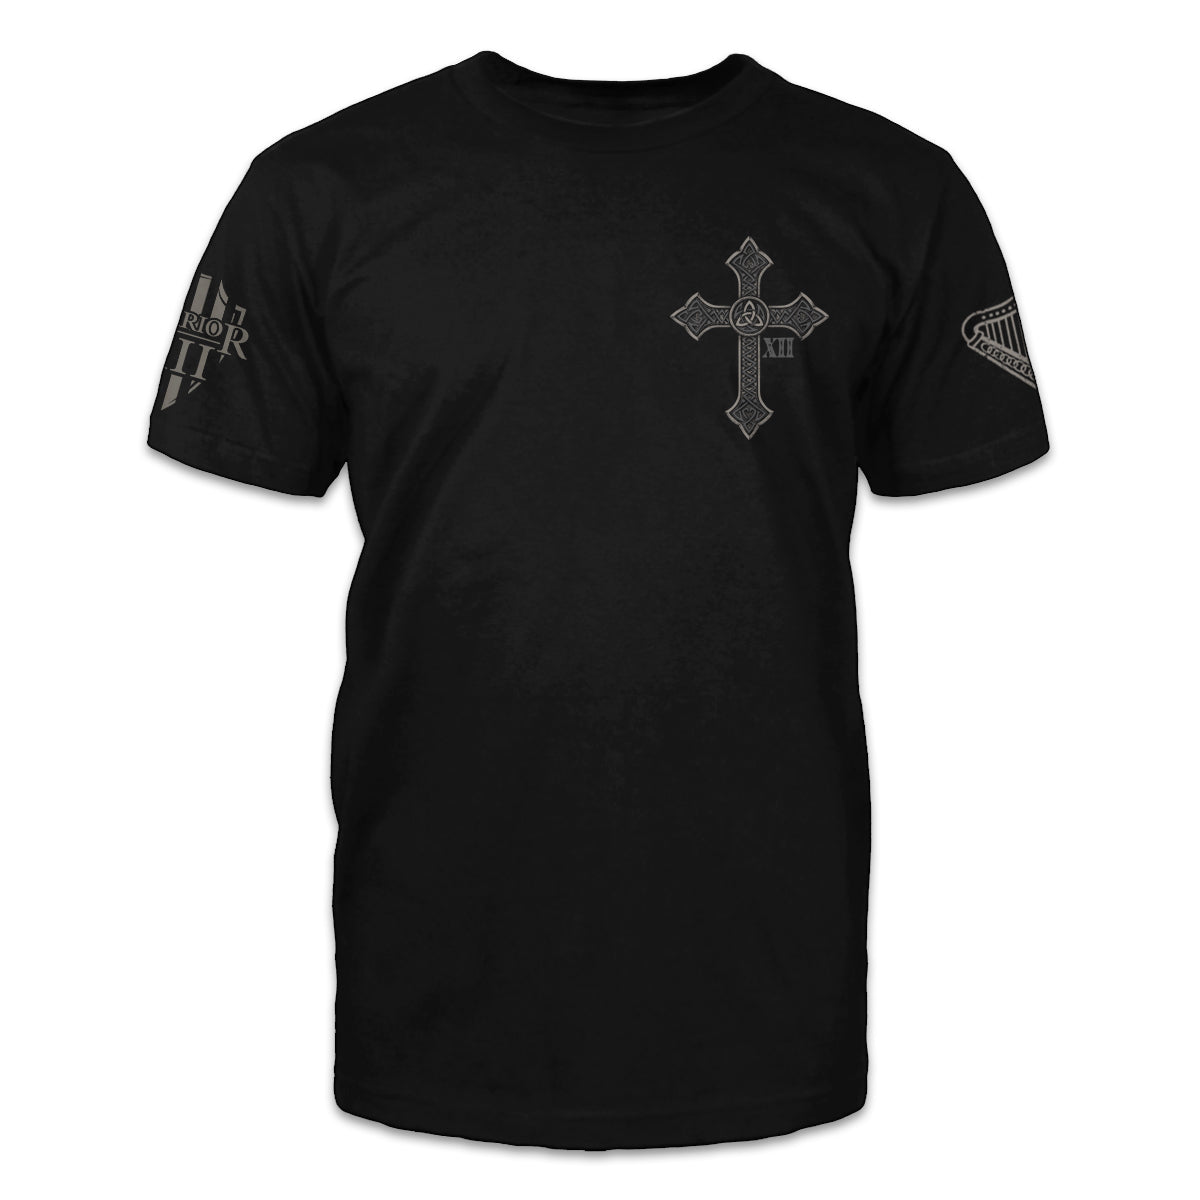 A black t-shirt with an Irish cross printed on the front of the shirt.